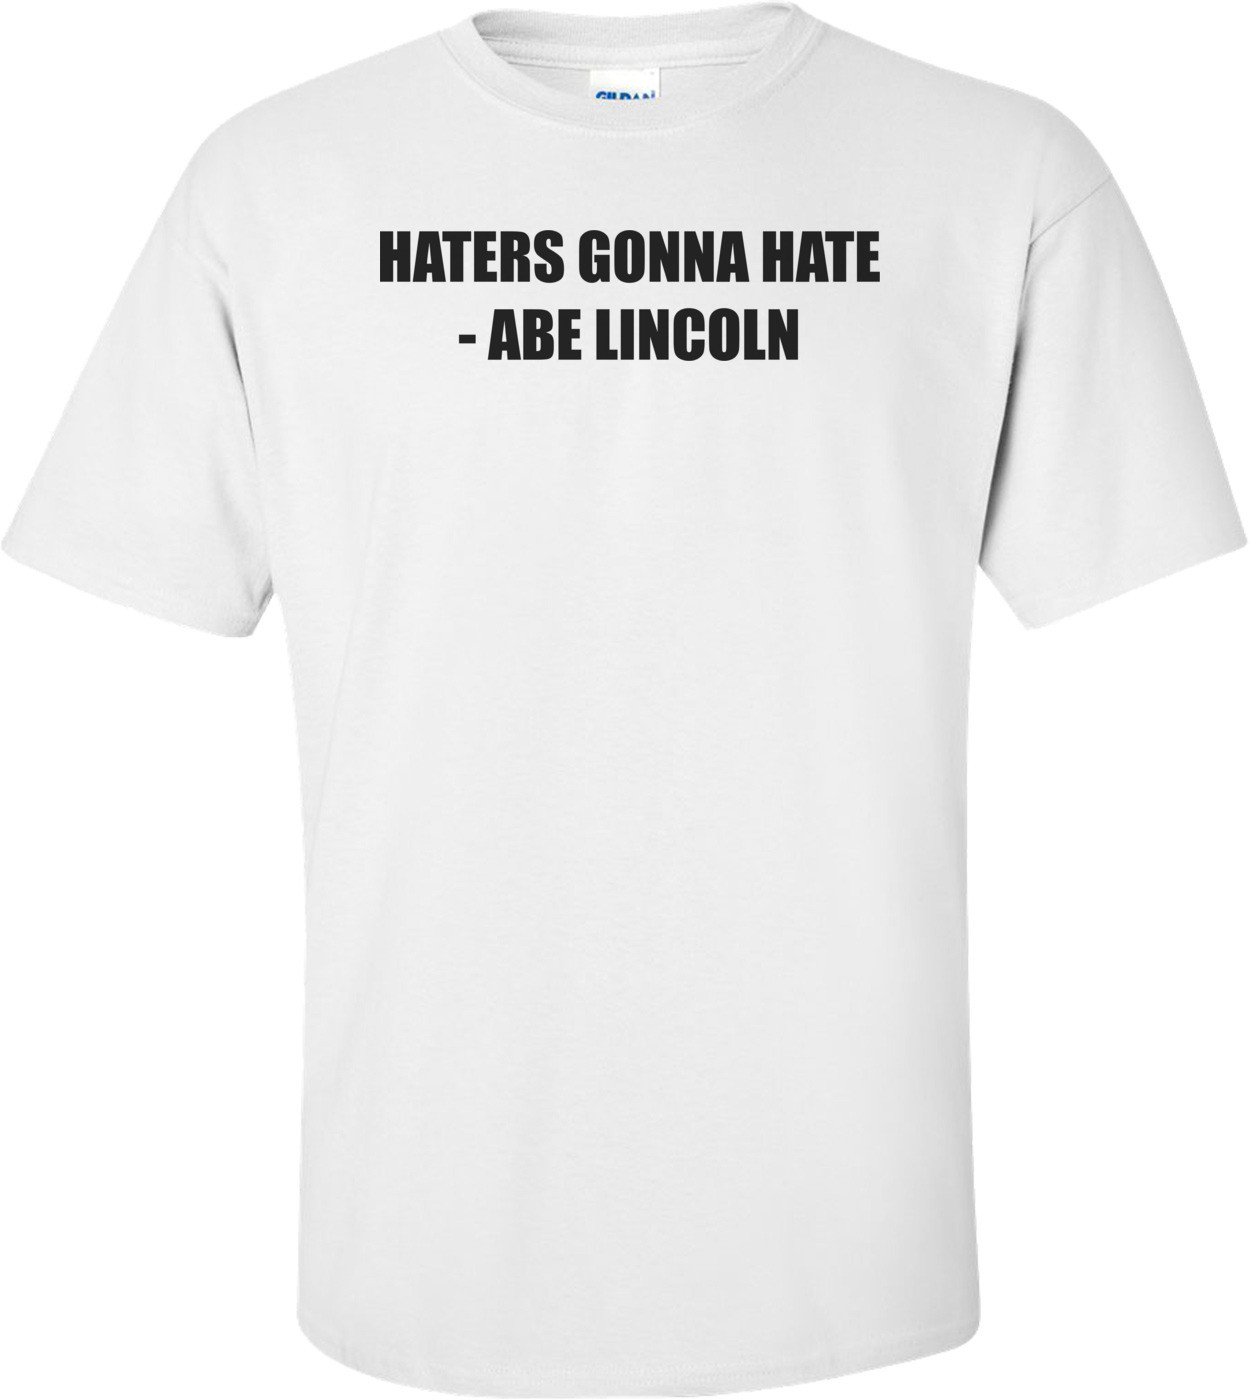 HATERS GONNA HATE - ABE LINCOLN Shirt